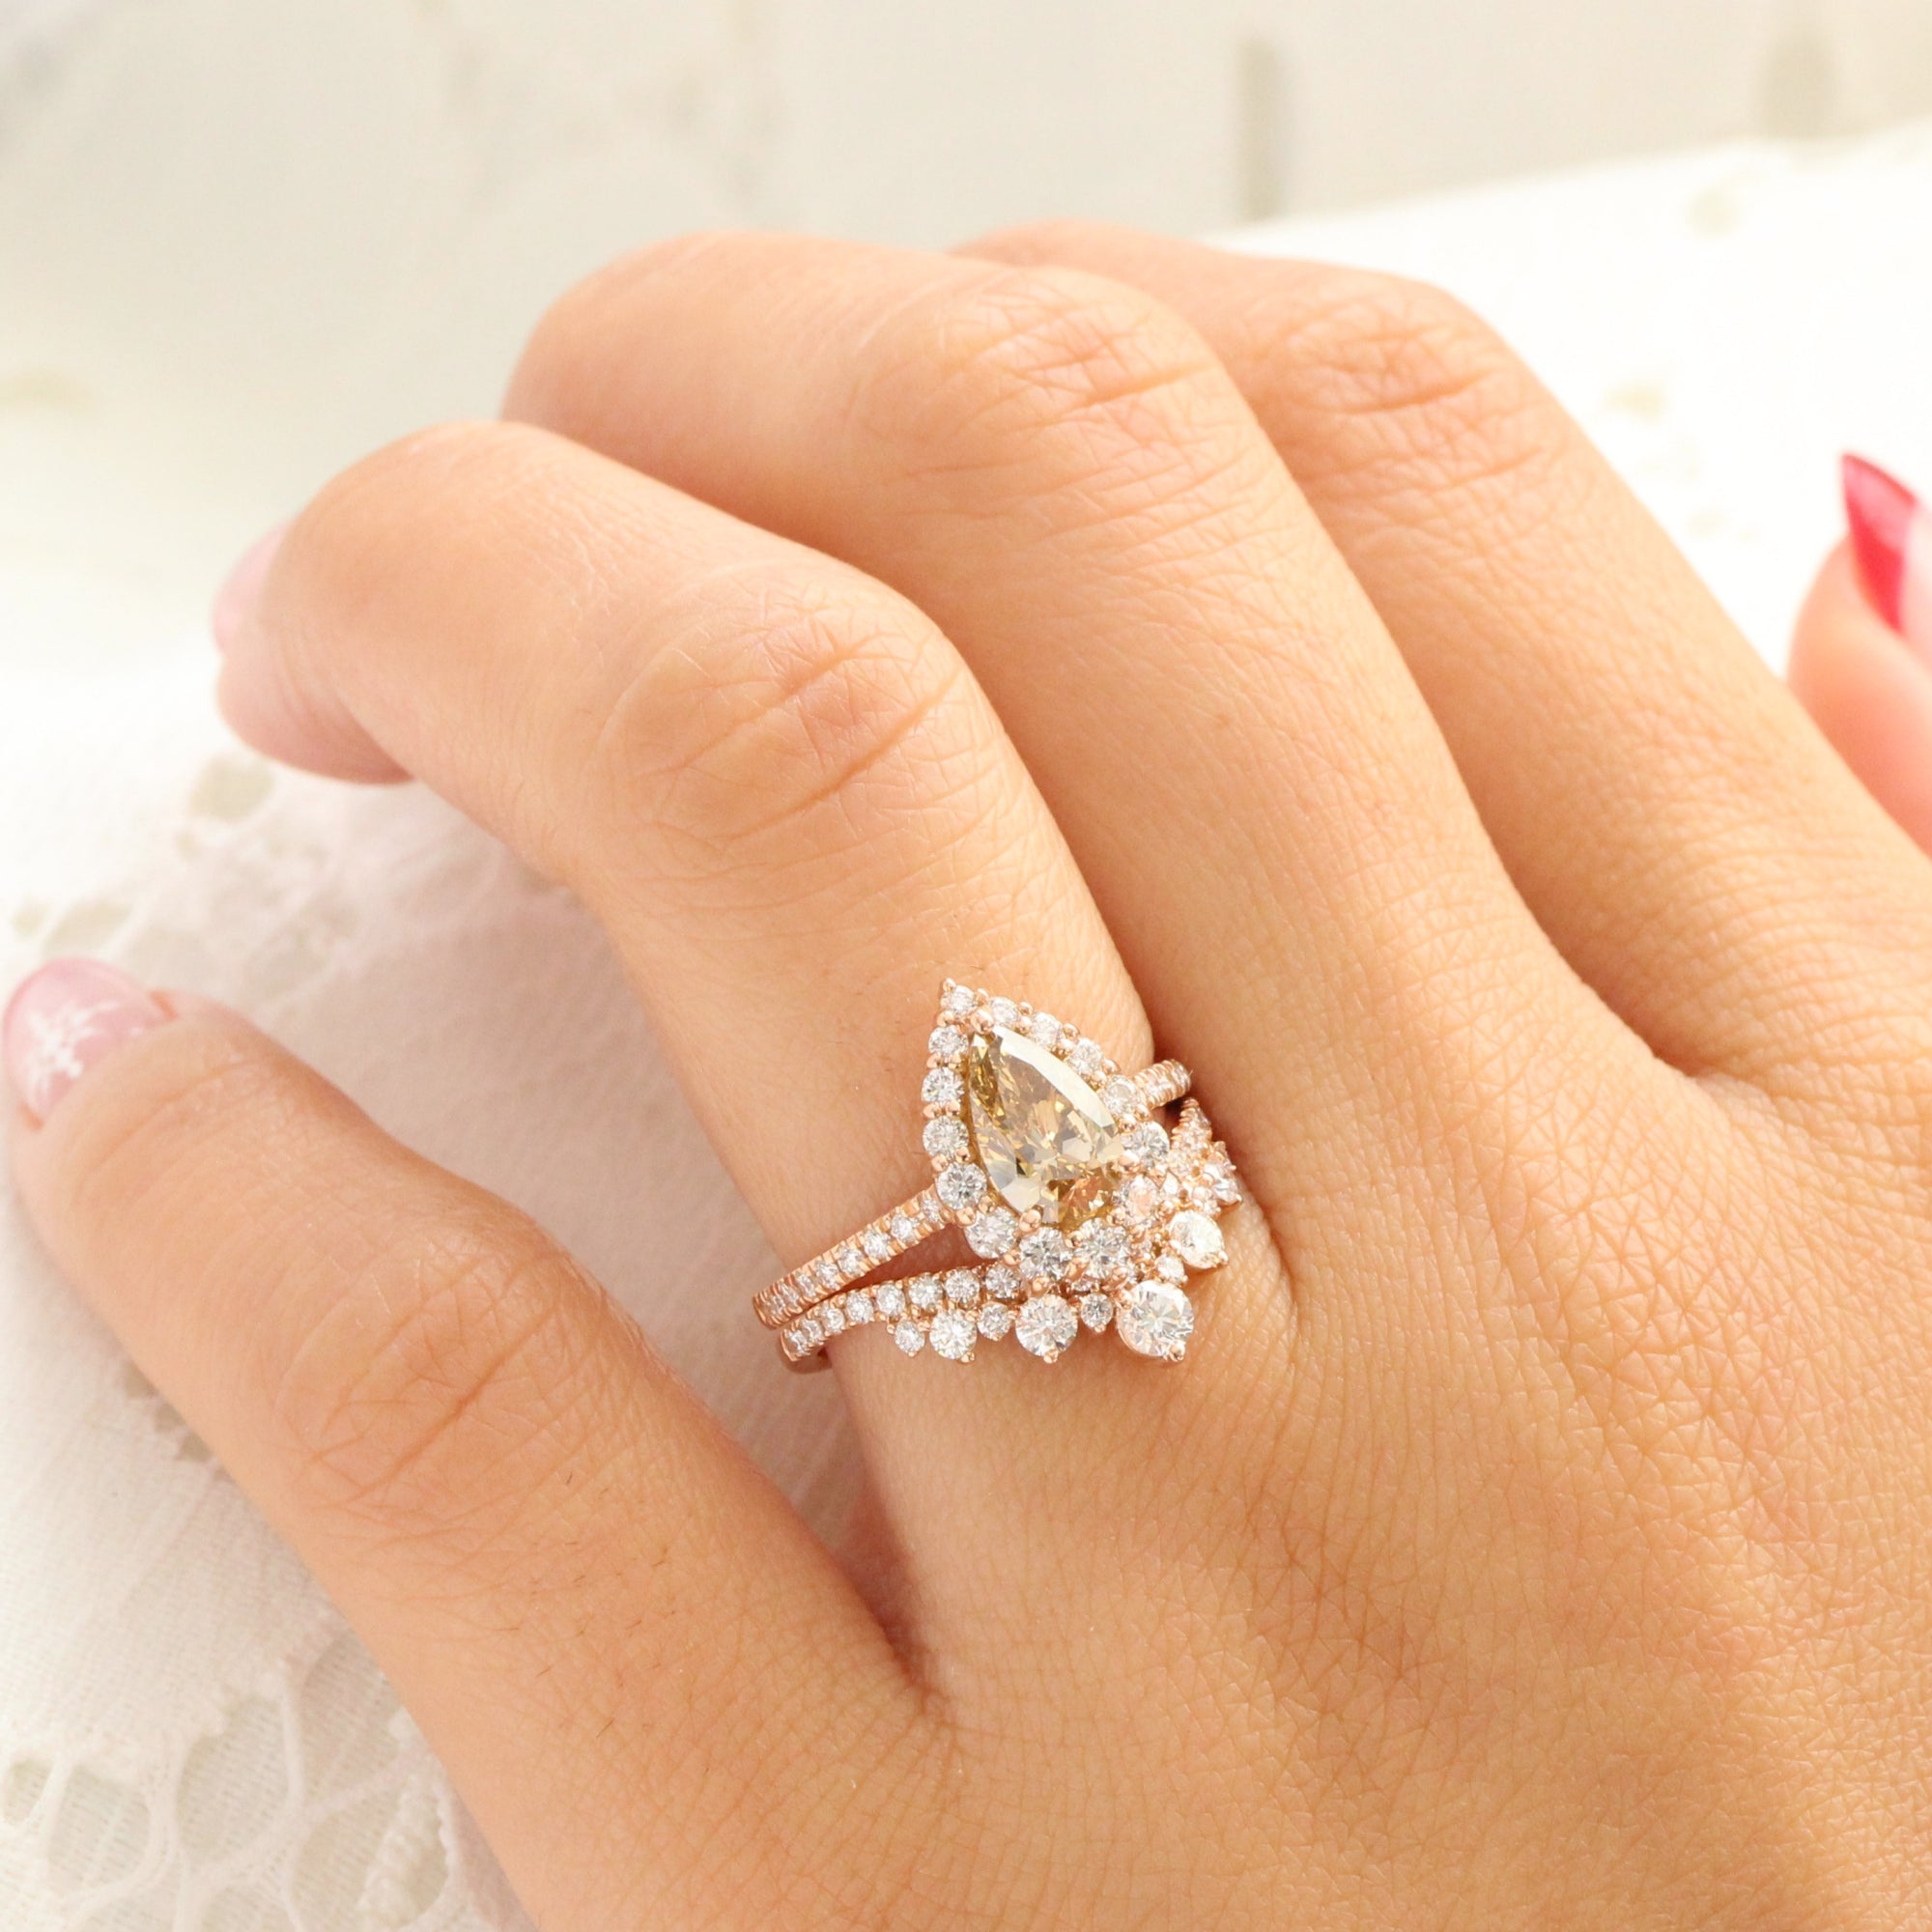 Pear champagne diamond ring rose gold halo engagement ring la more design jewelry